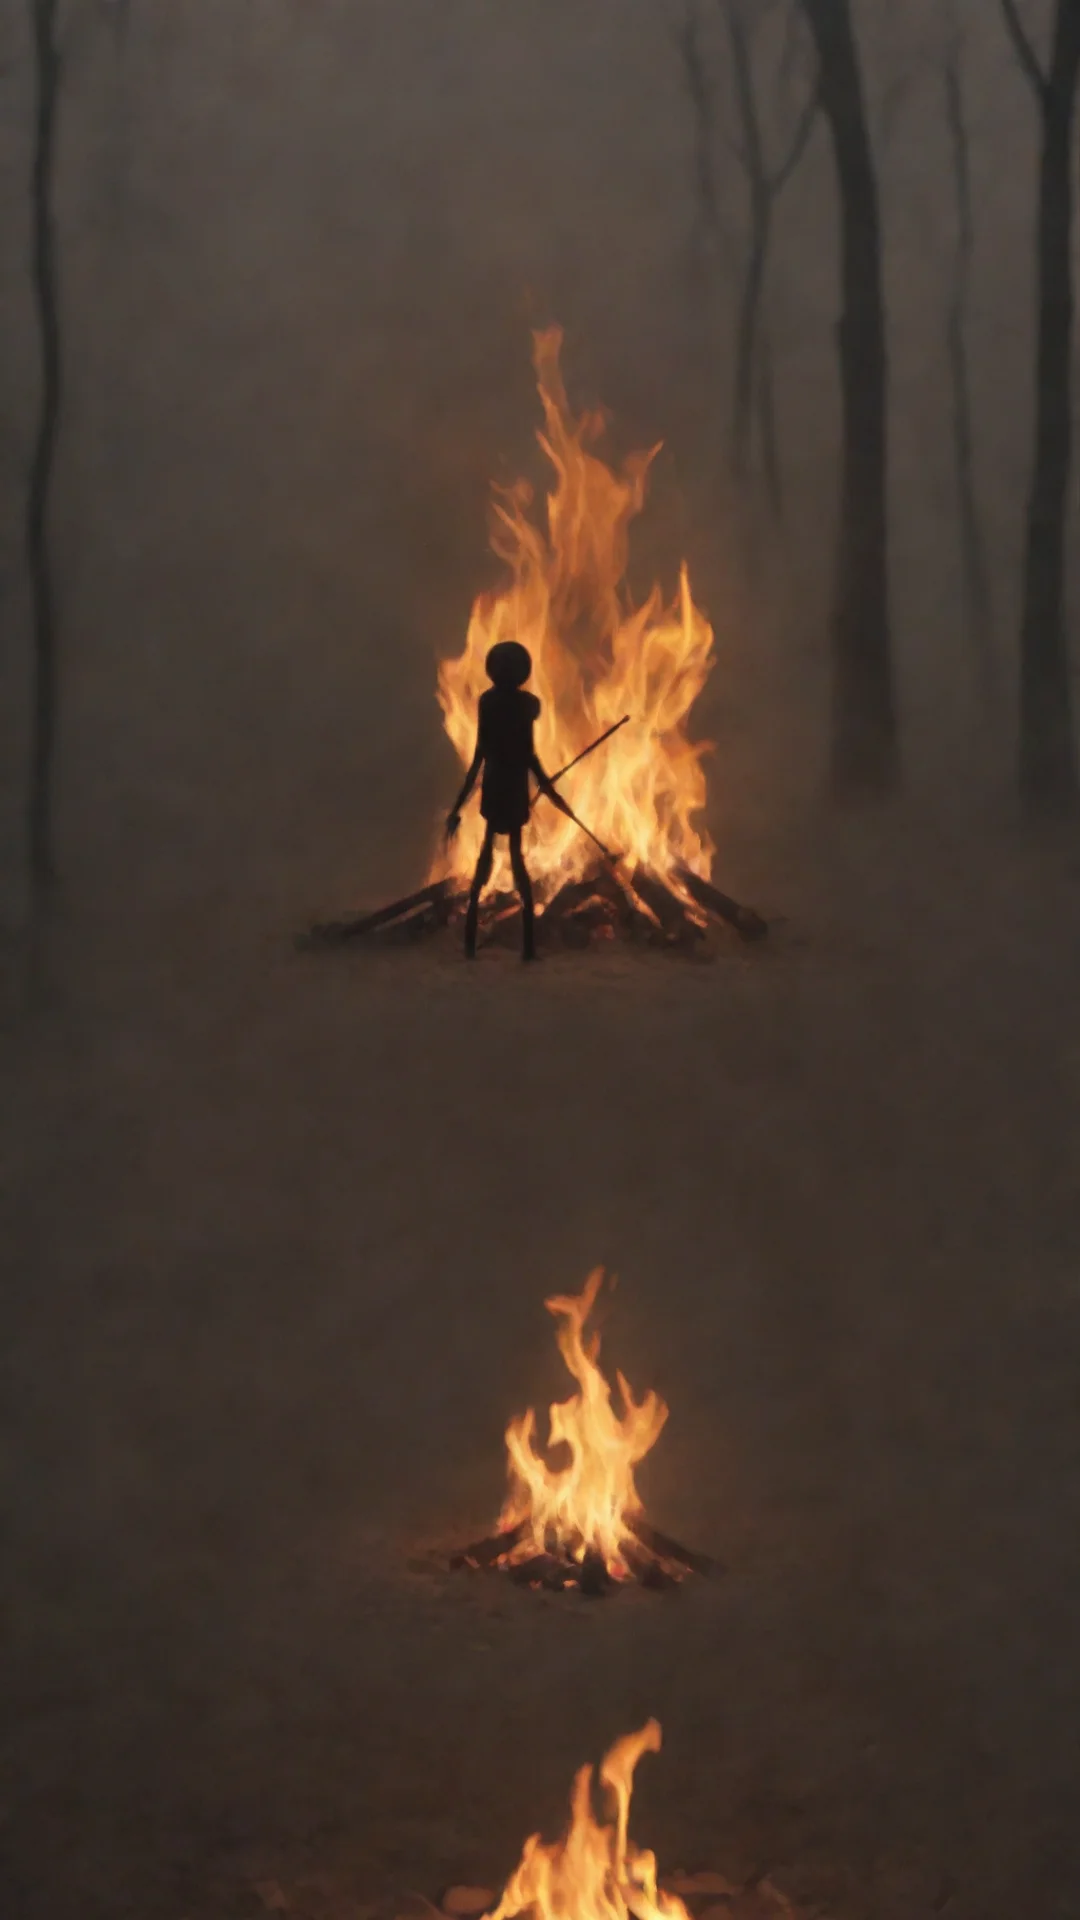 aiartstation art stickman around a fire confident engaging wow 3 tall